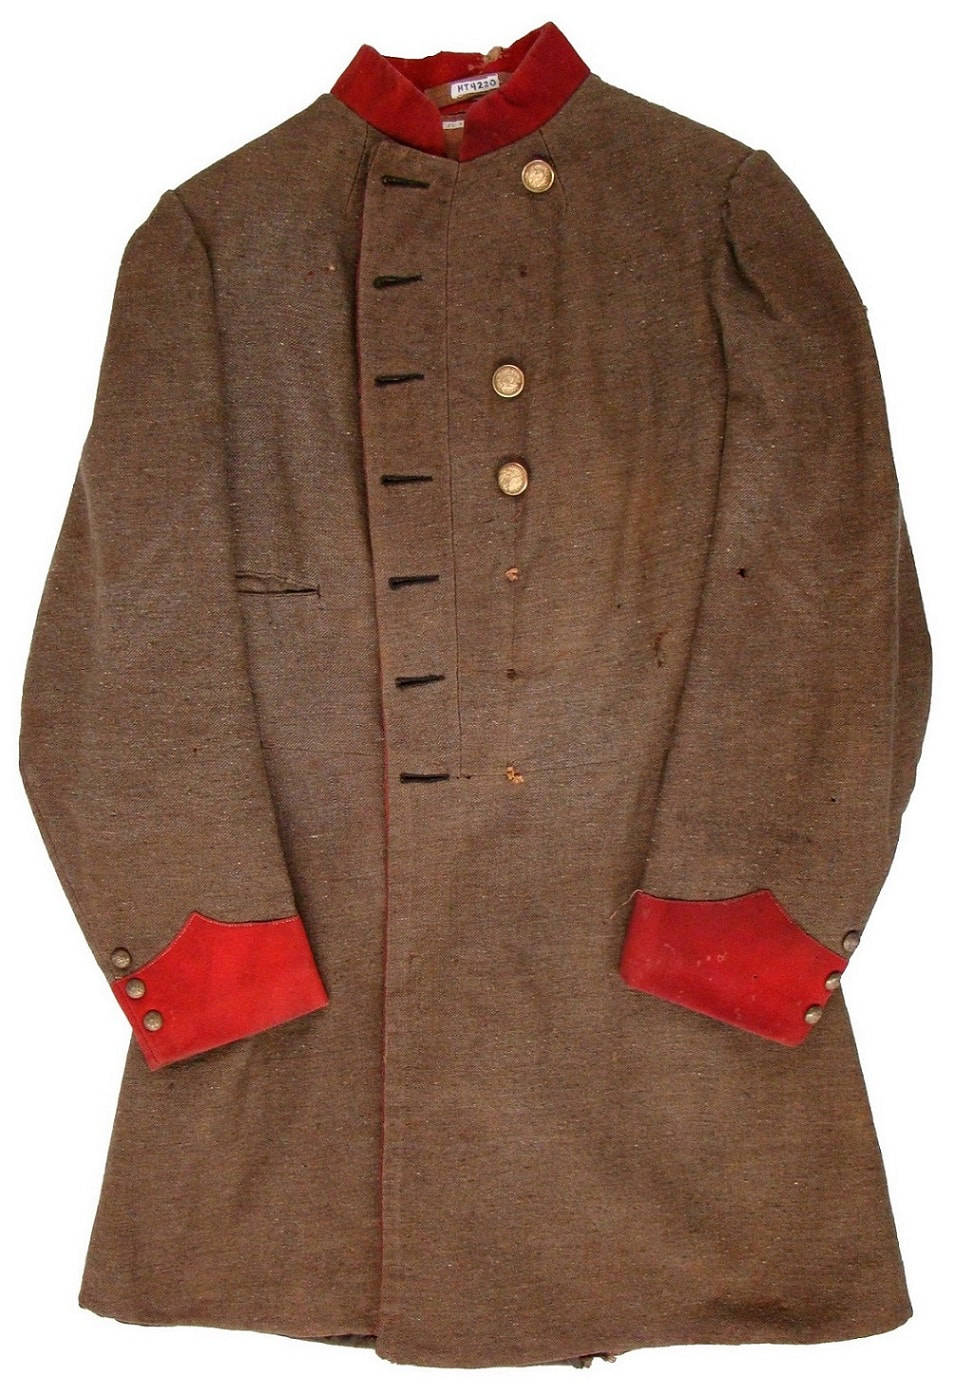 Confederate Uniforms of the Lower South, Part V: Miscellaneous Clothing ...